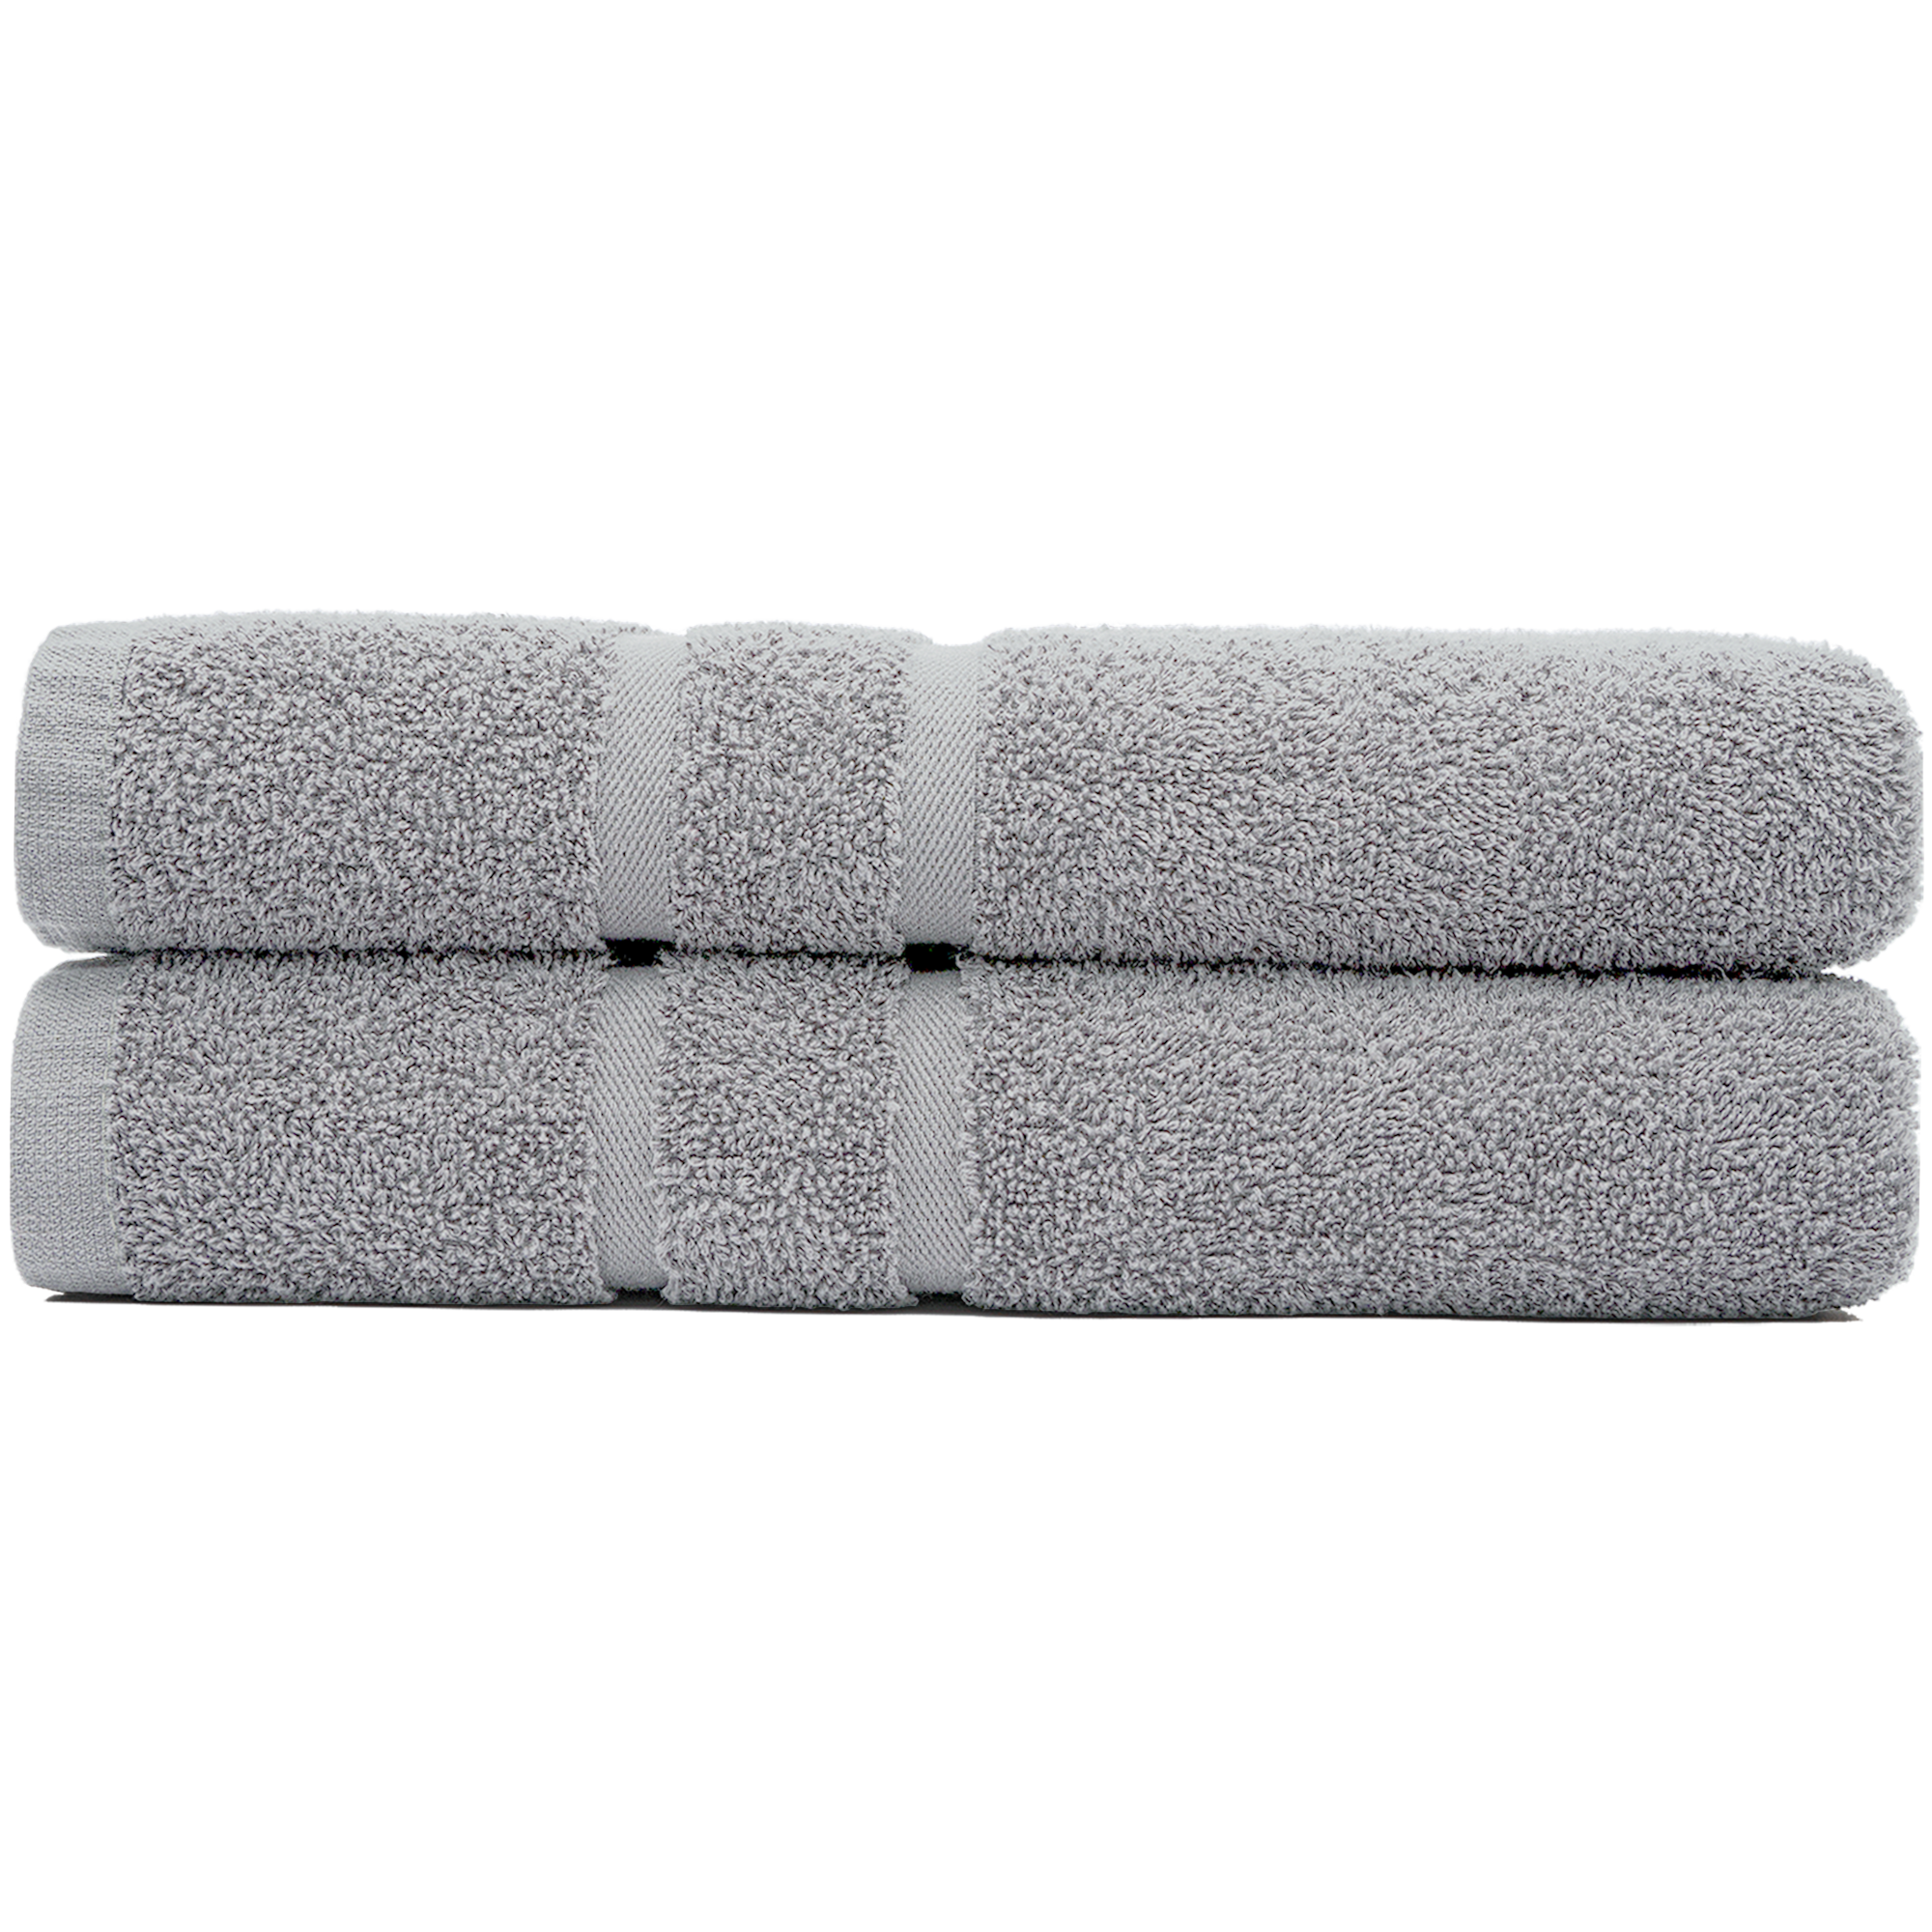 Light grey bath towels two pack